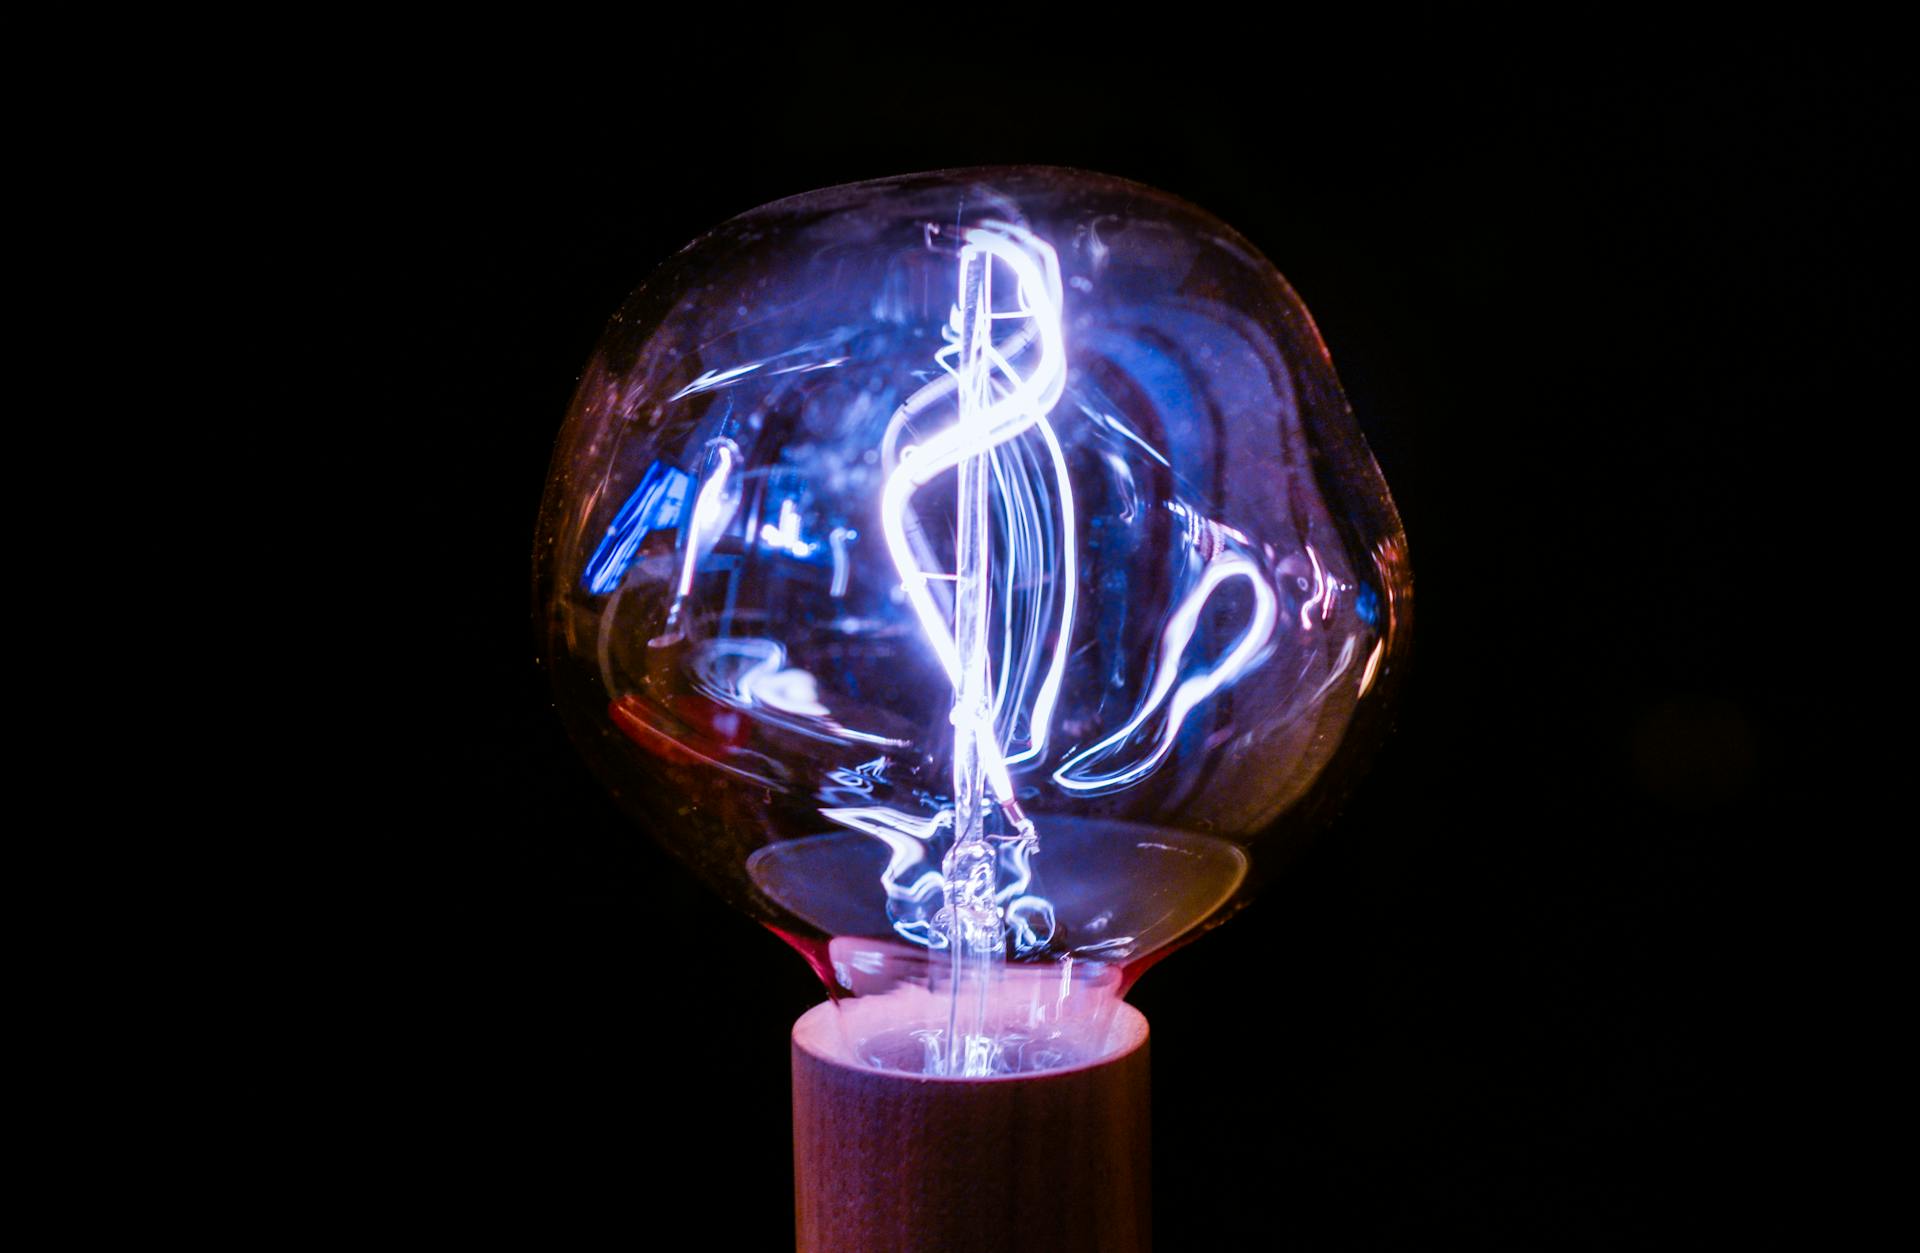 Misshapen lightbulb's light reflects in waves of purple and blue hues.